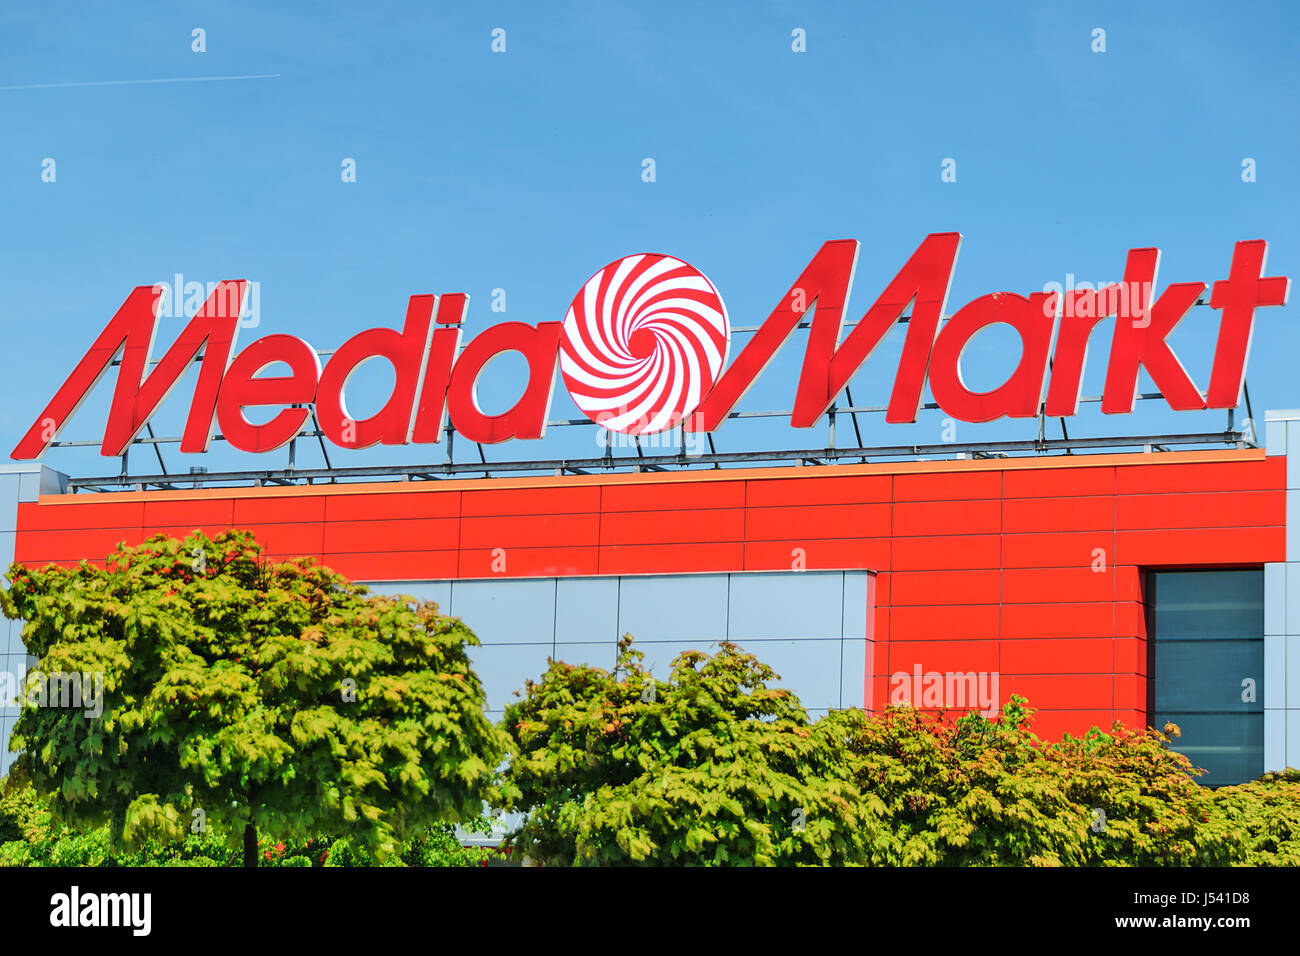 Nowy Sacz, Poland - 15 May 2017: Sign of a Media Markt store on the blue sky. Mediamarkt is a German chain of stores selling consumer electronics with Stock Photo